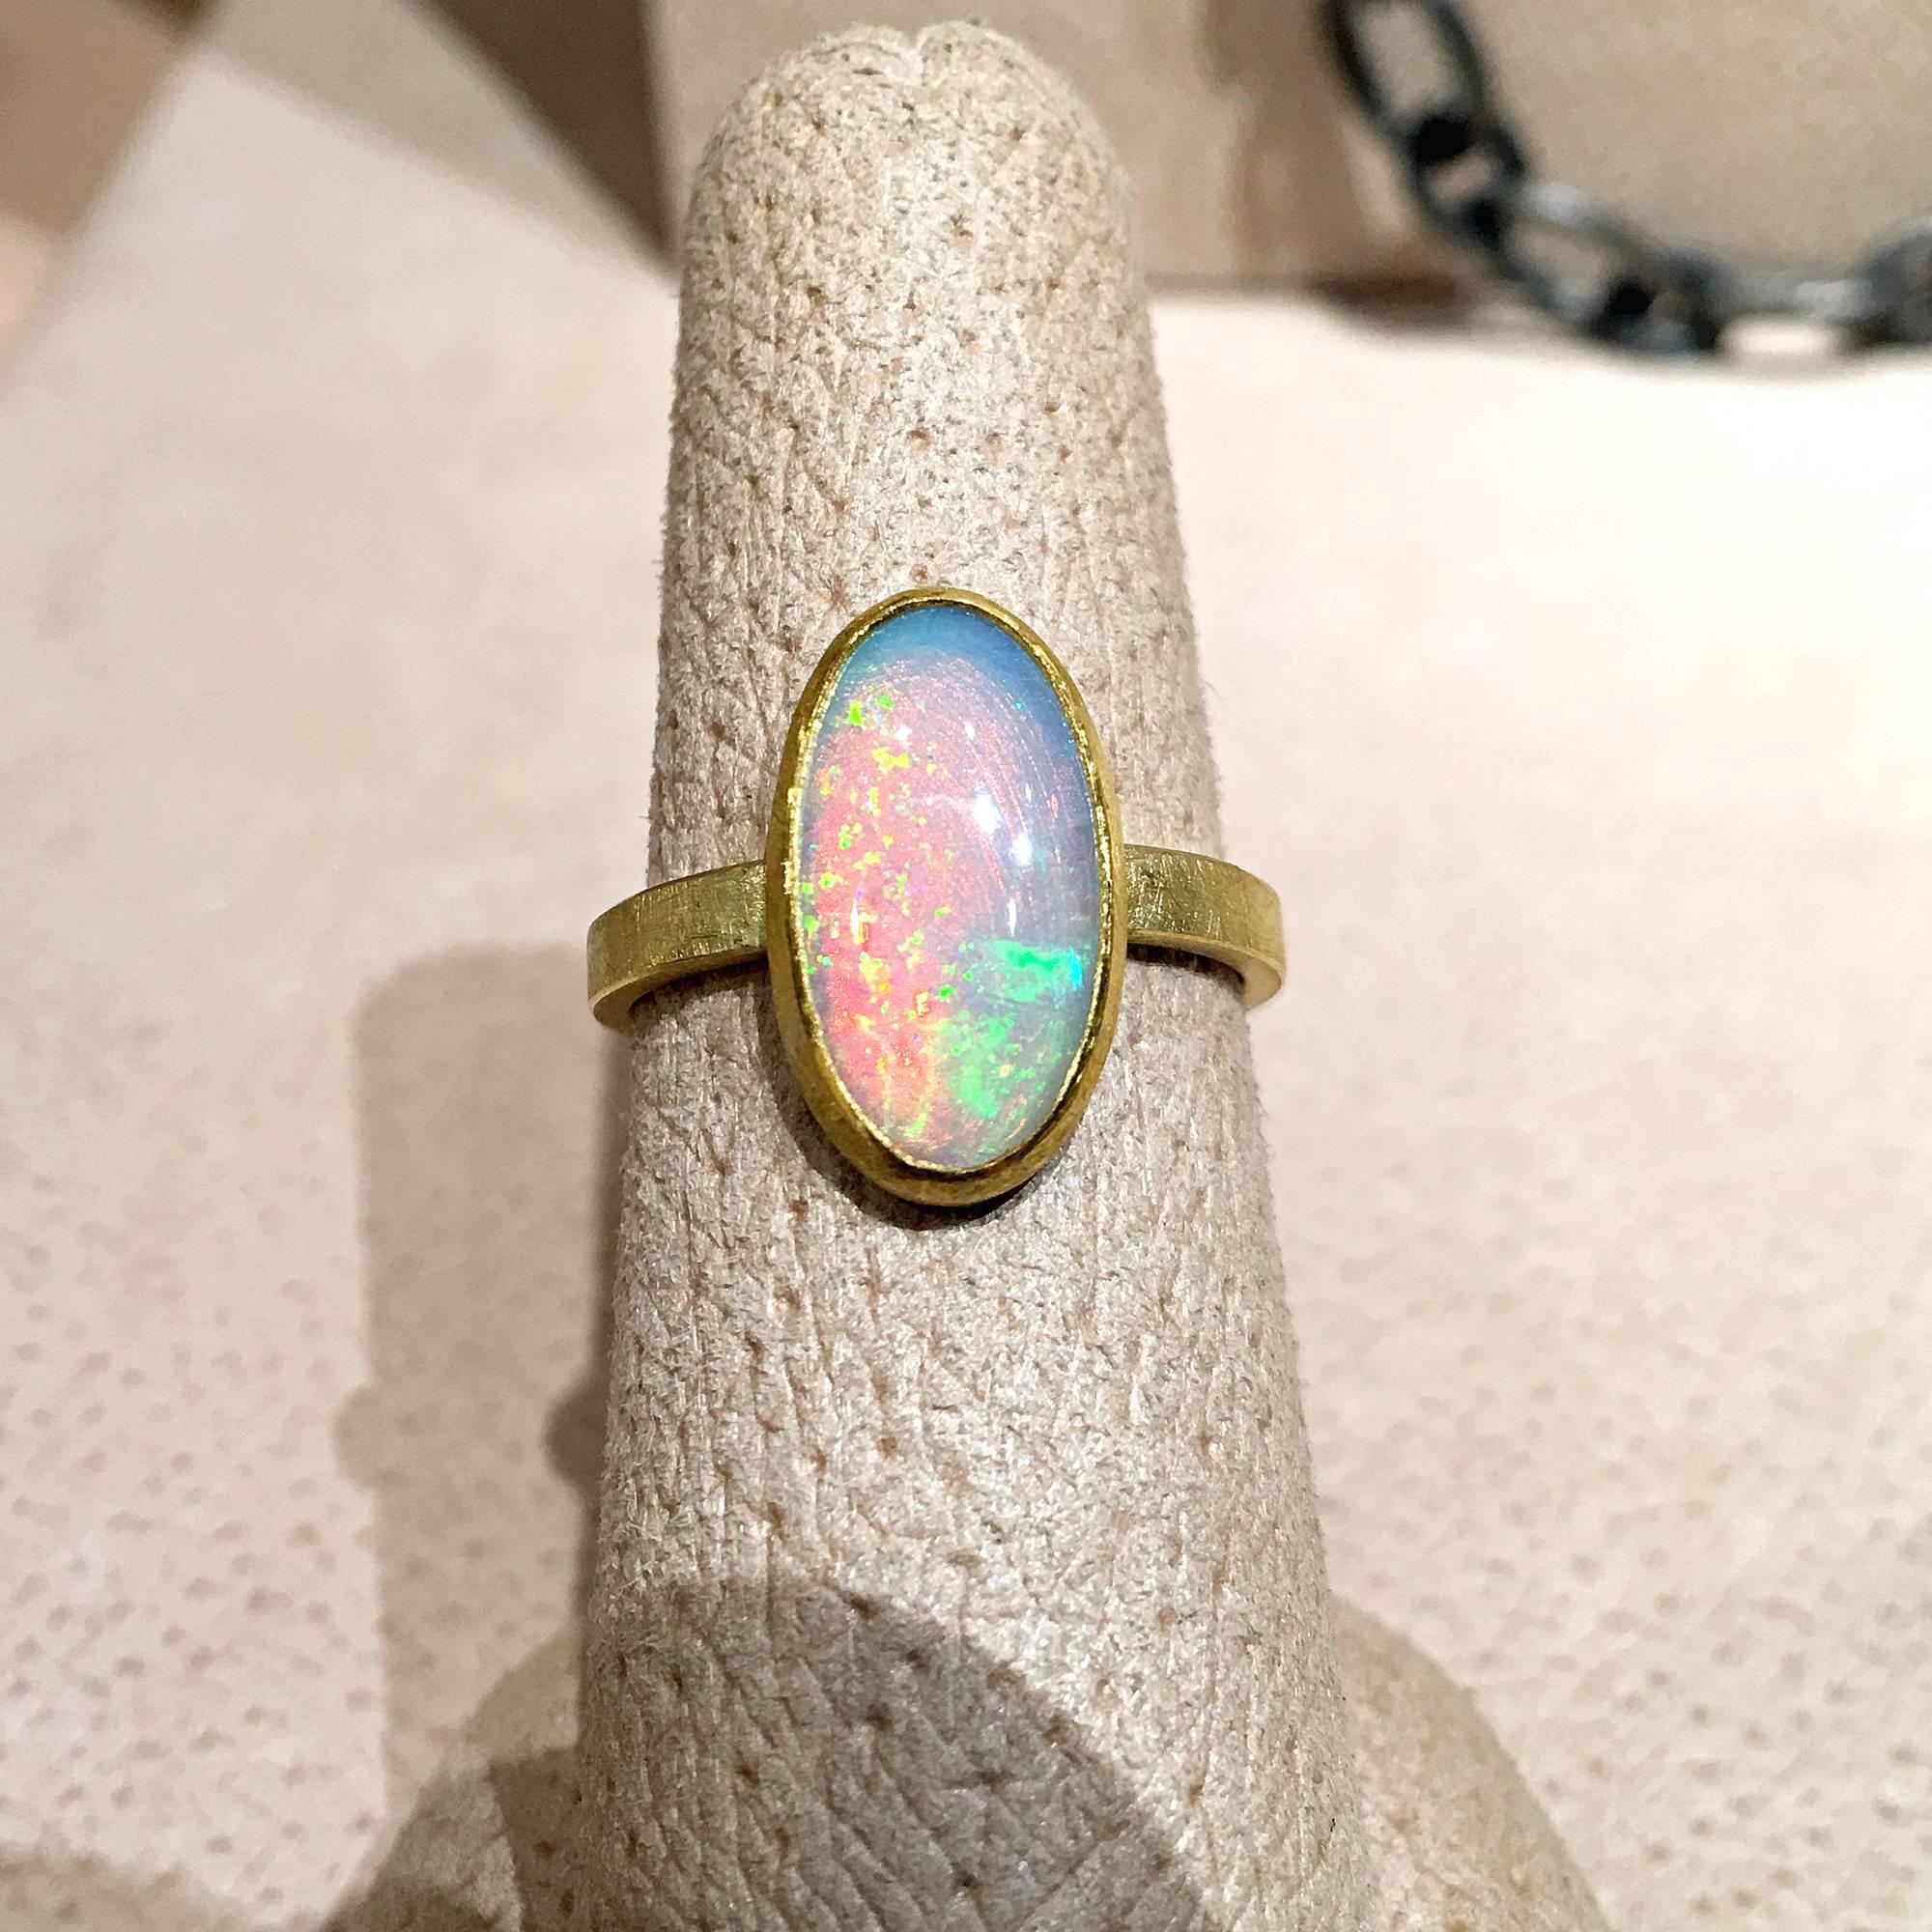 One of a Kind Ring handcrafted by jewelry designer Petra Class featuring a unique orangy-red glow 2.20 carat Ethiopian white opal with beautiful electric color-play, bezel-set in matte-finished 22k yellow gold and set on a handmade 18k yellow gold